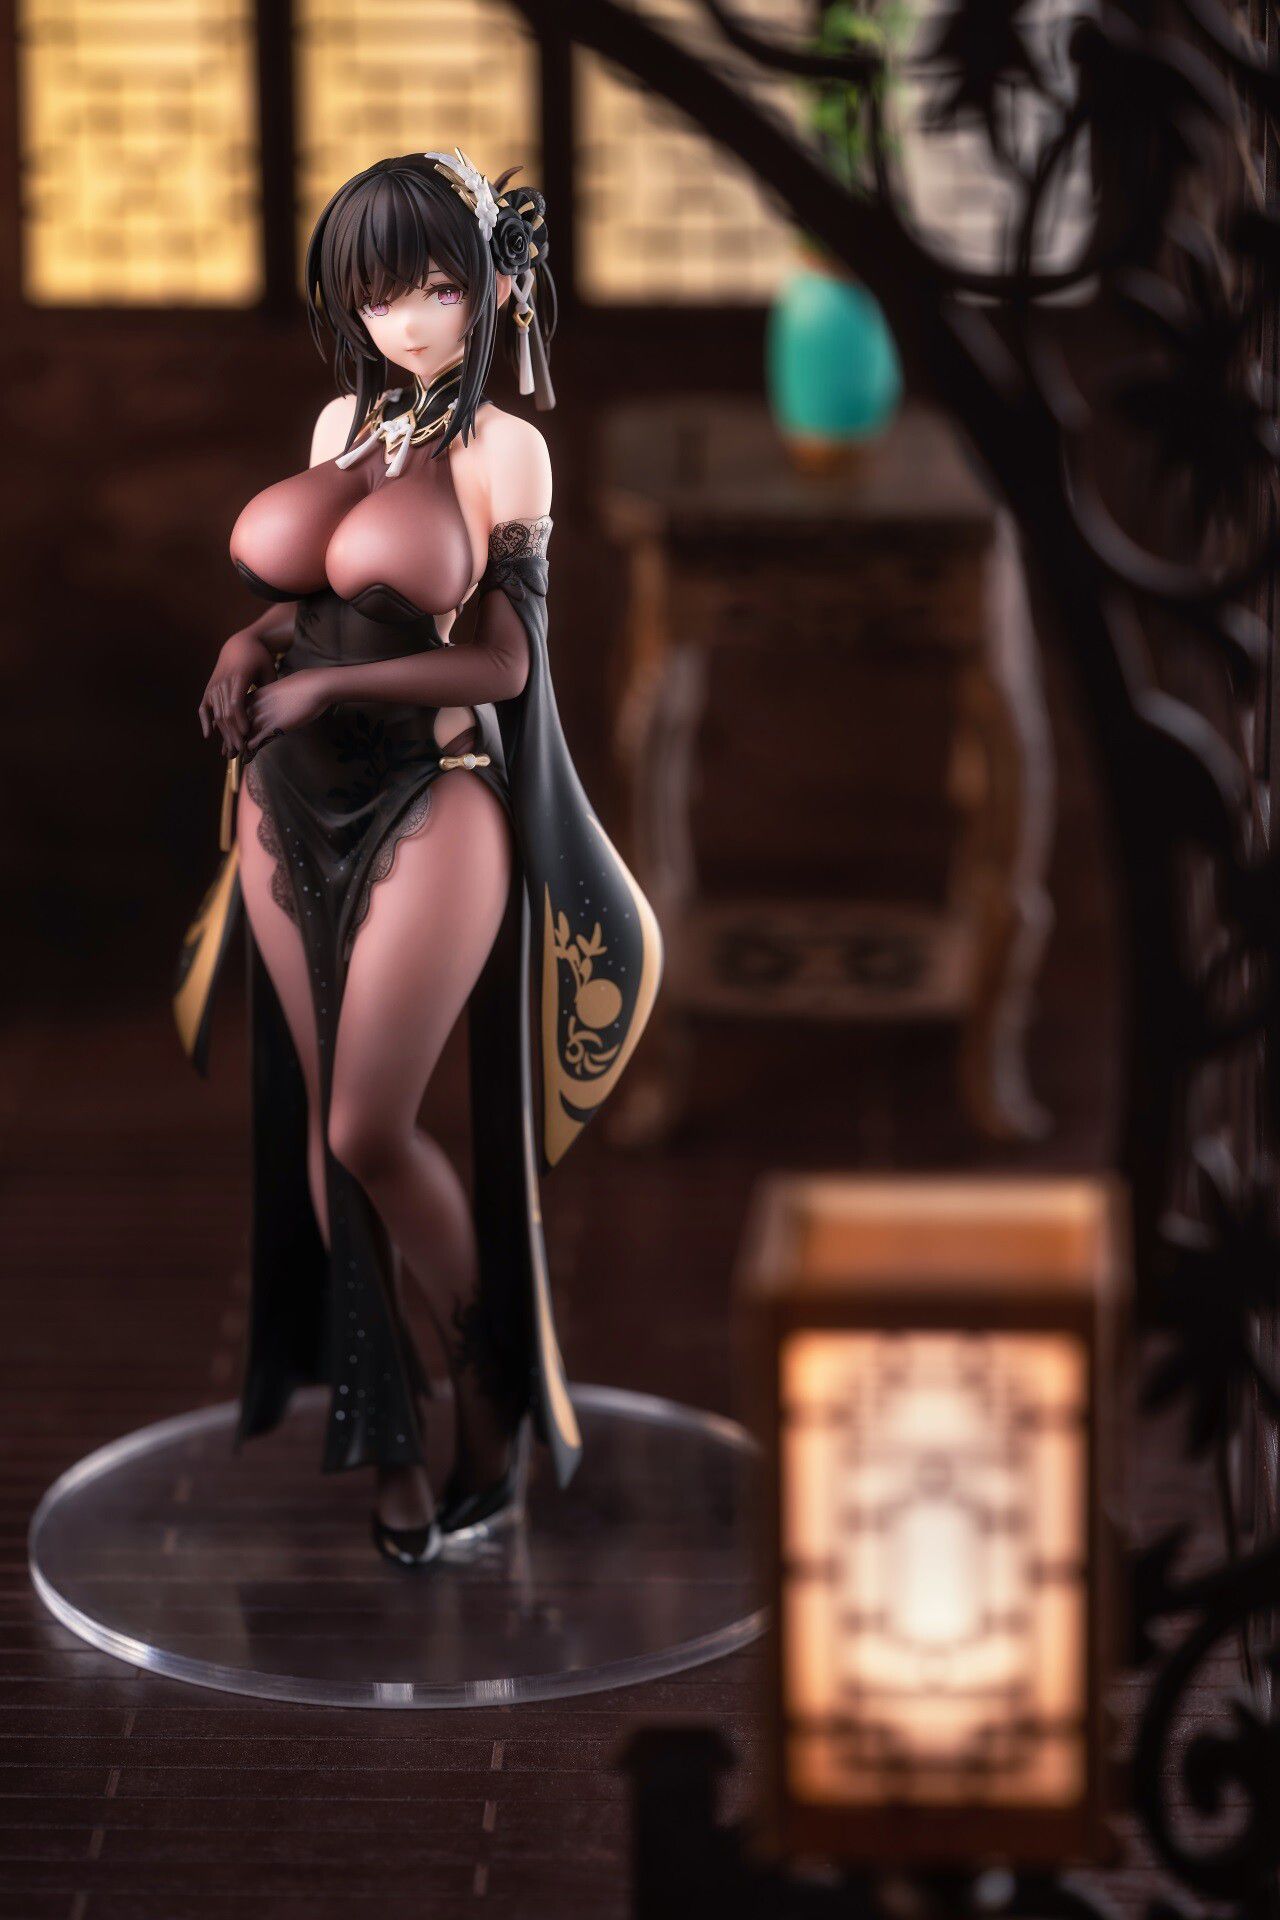 "Azure Lane" A ridiculously erotic figure with a full view of the back and buttocks from behind with the whip of the sea 3